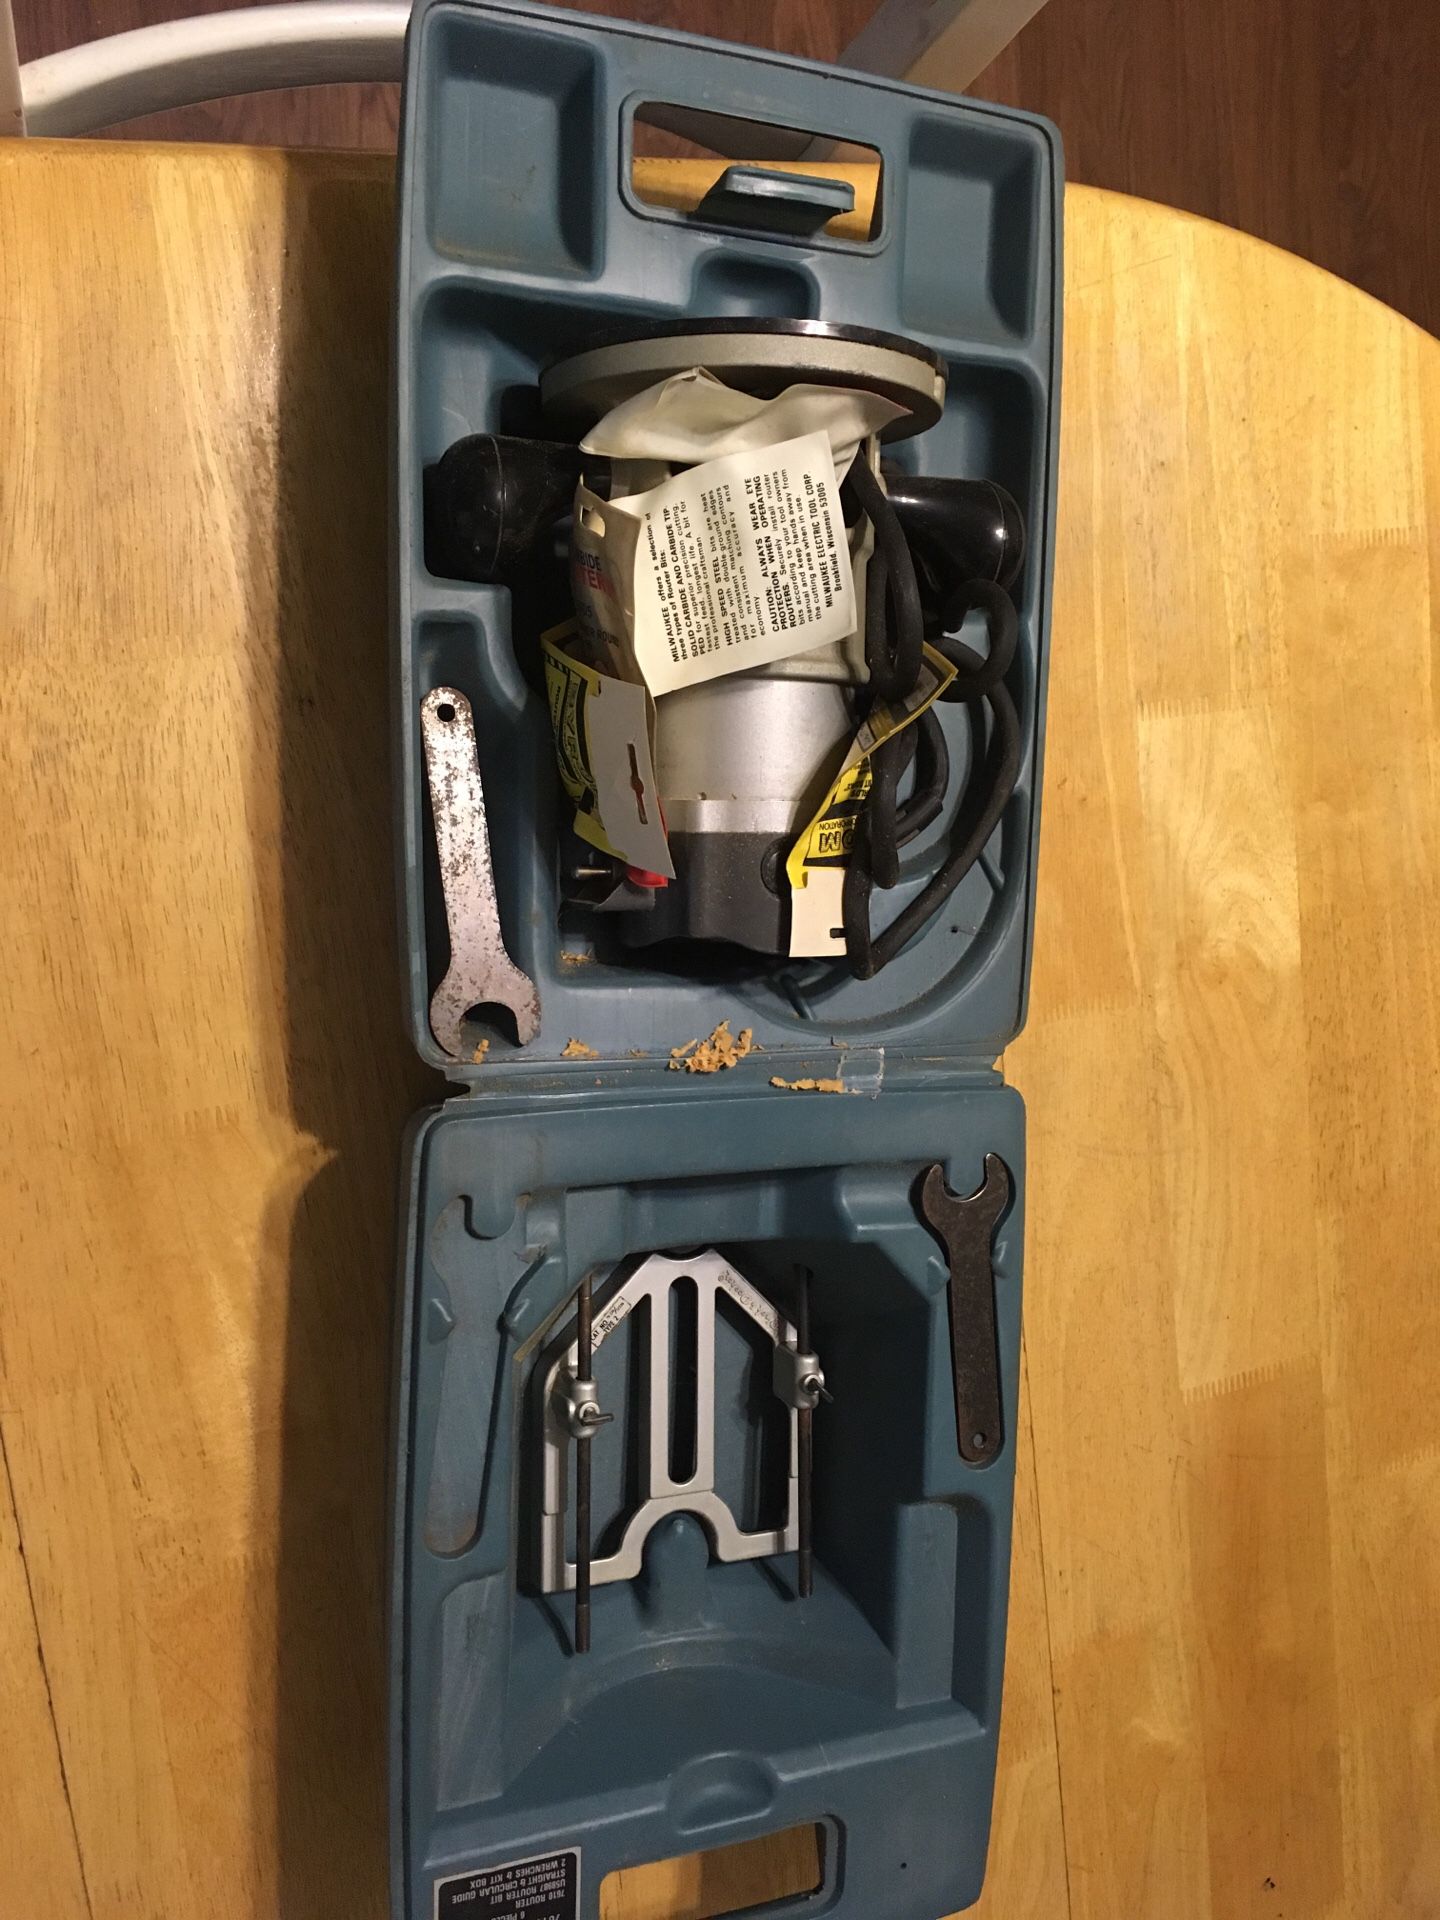 Black and decker 7611 Router kit for Sale in North Wales, PA - OfferUp